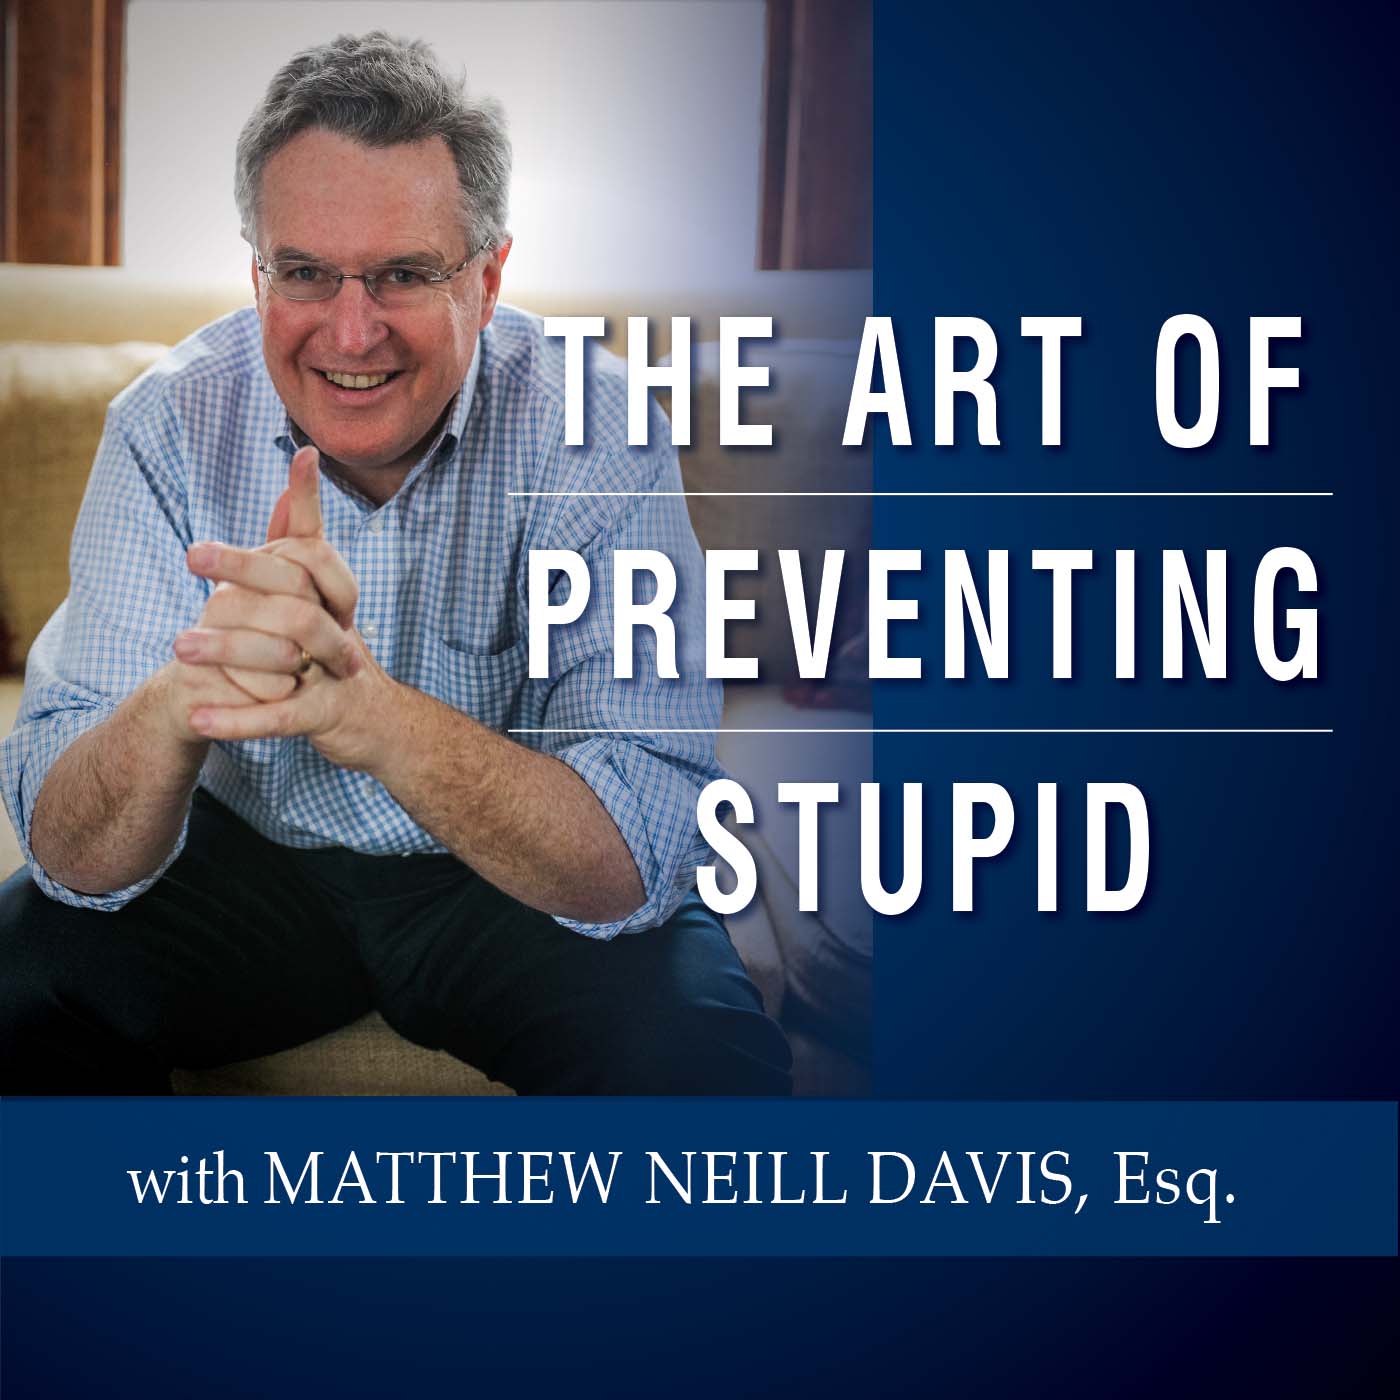 The Art of Preventing Stupid